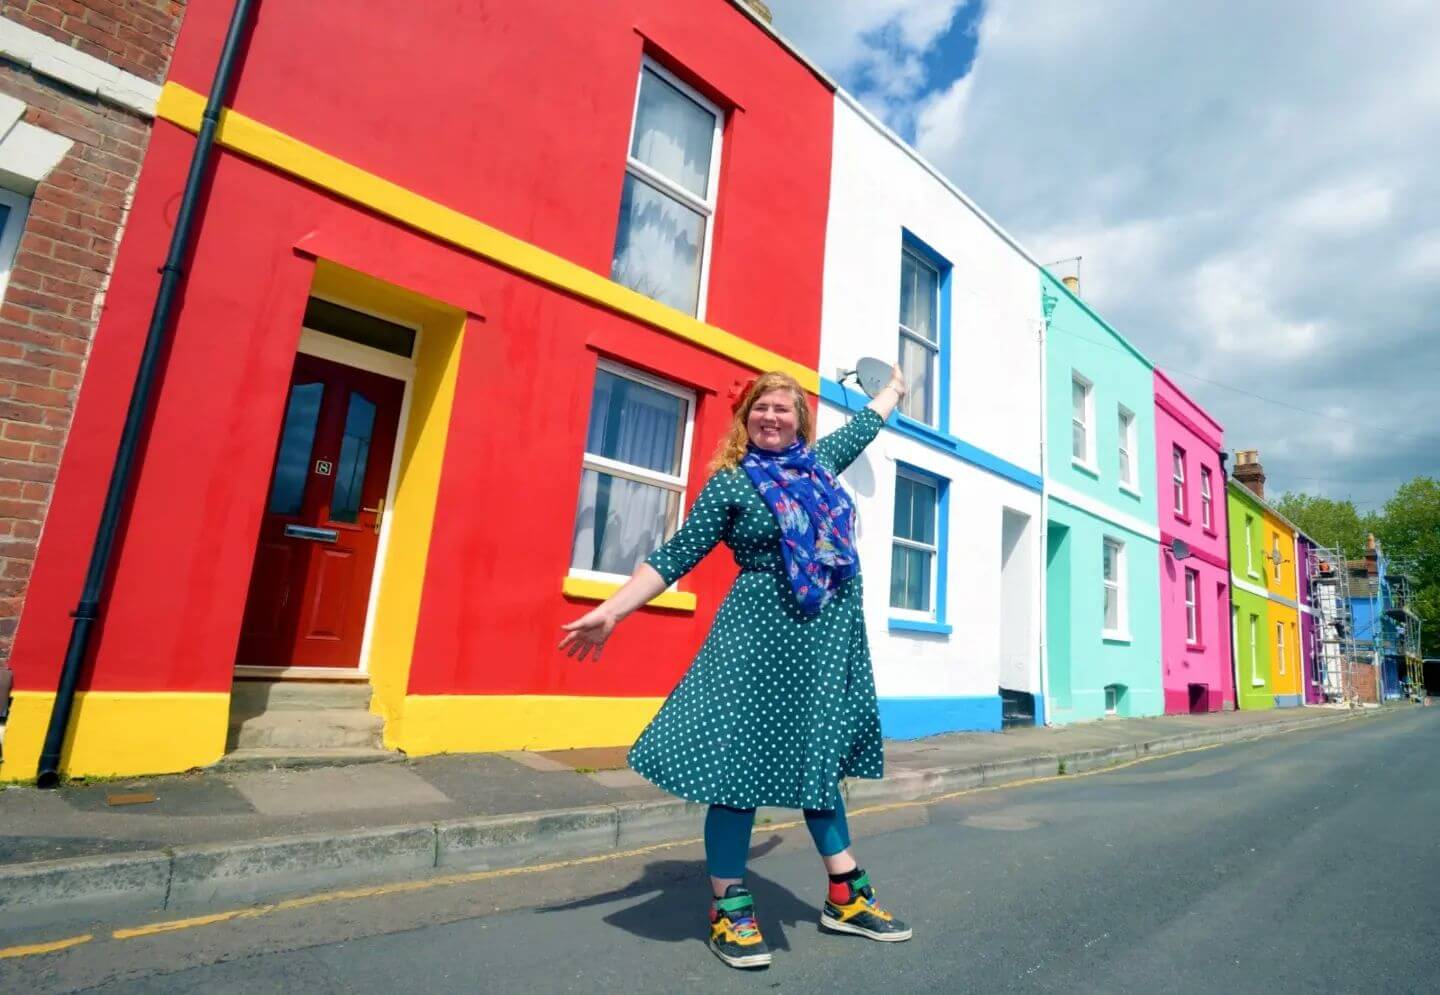 Her city garnered negative opinions over the years and Tash’s mission is to inject colour and creativity into her city.